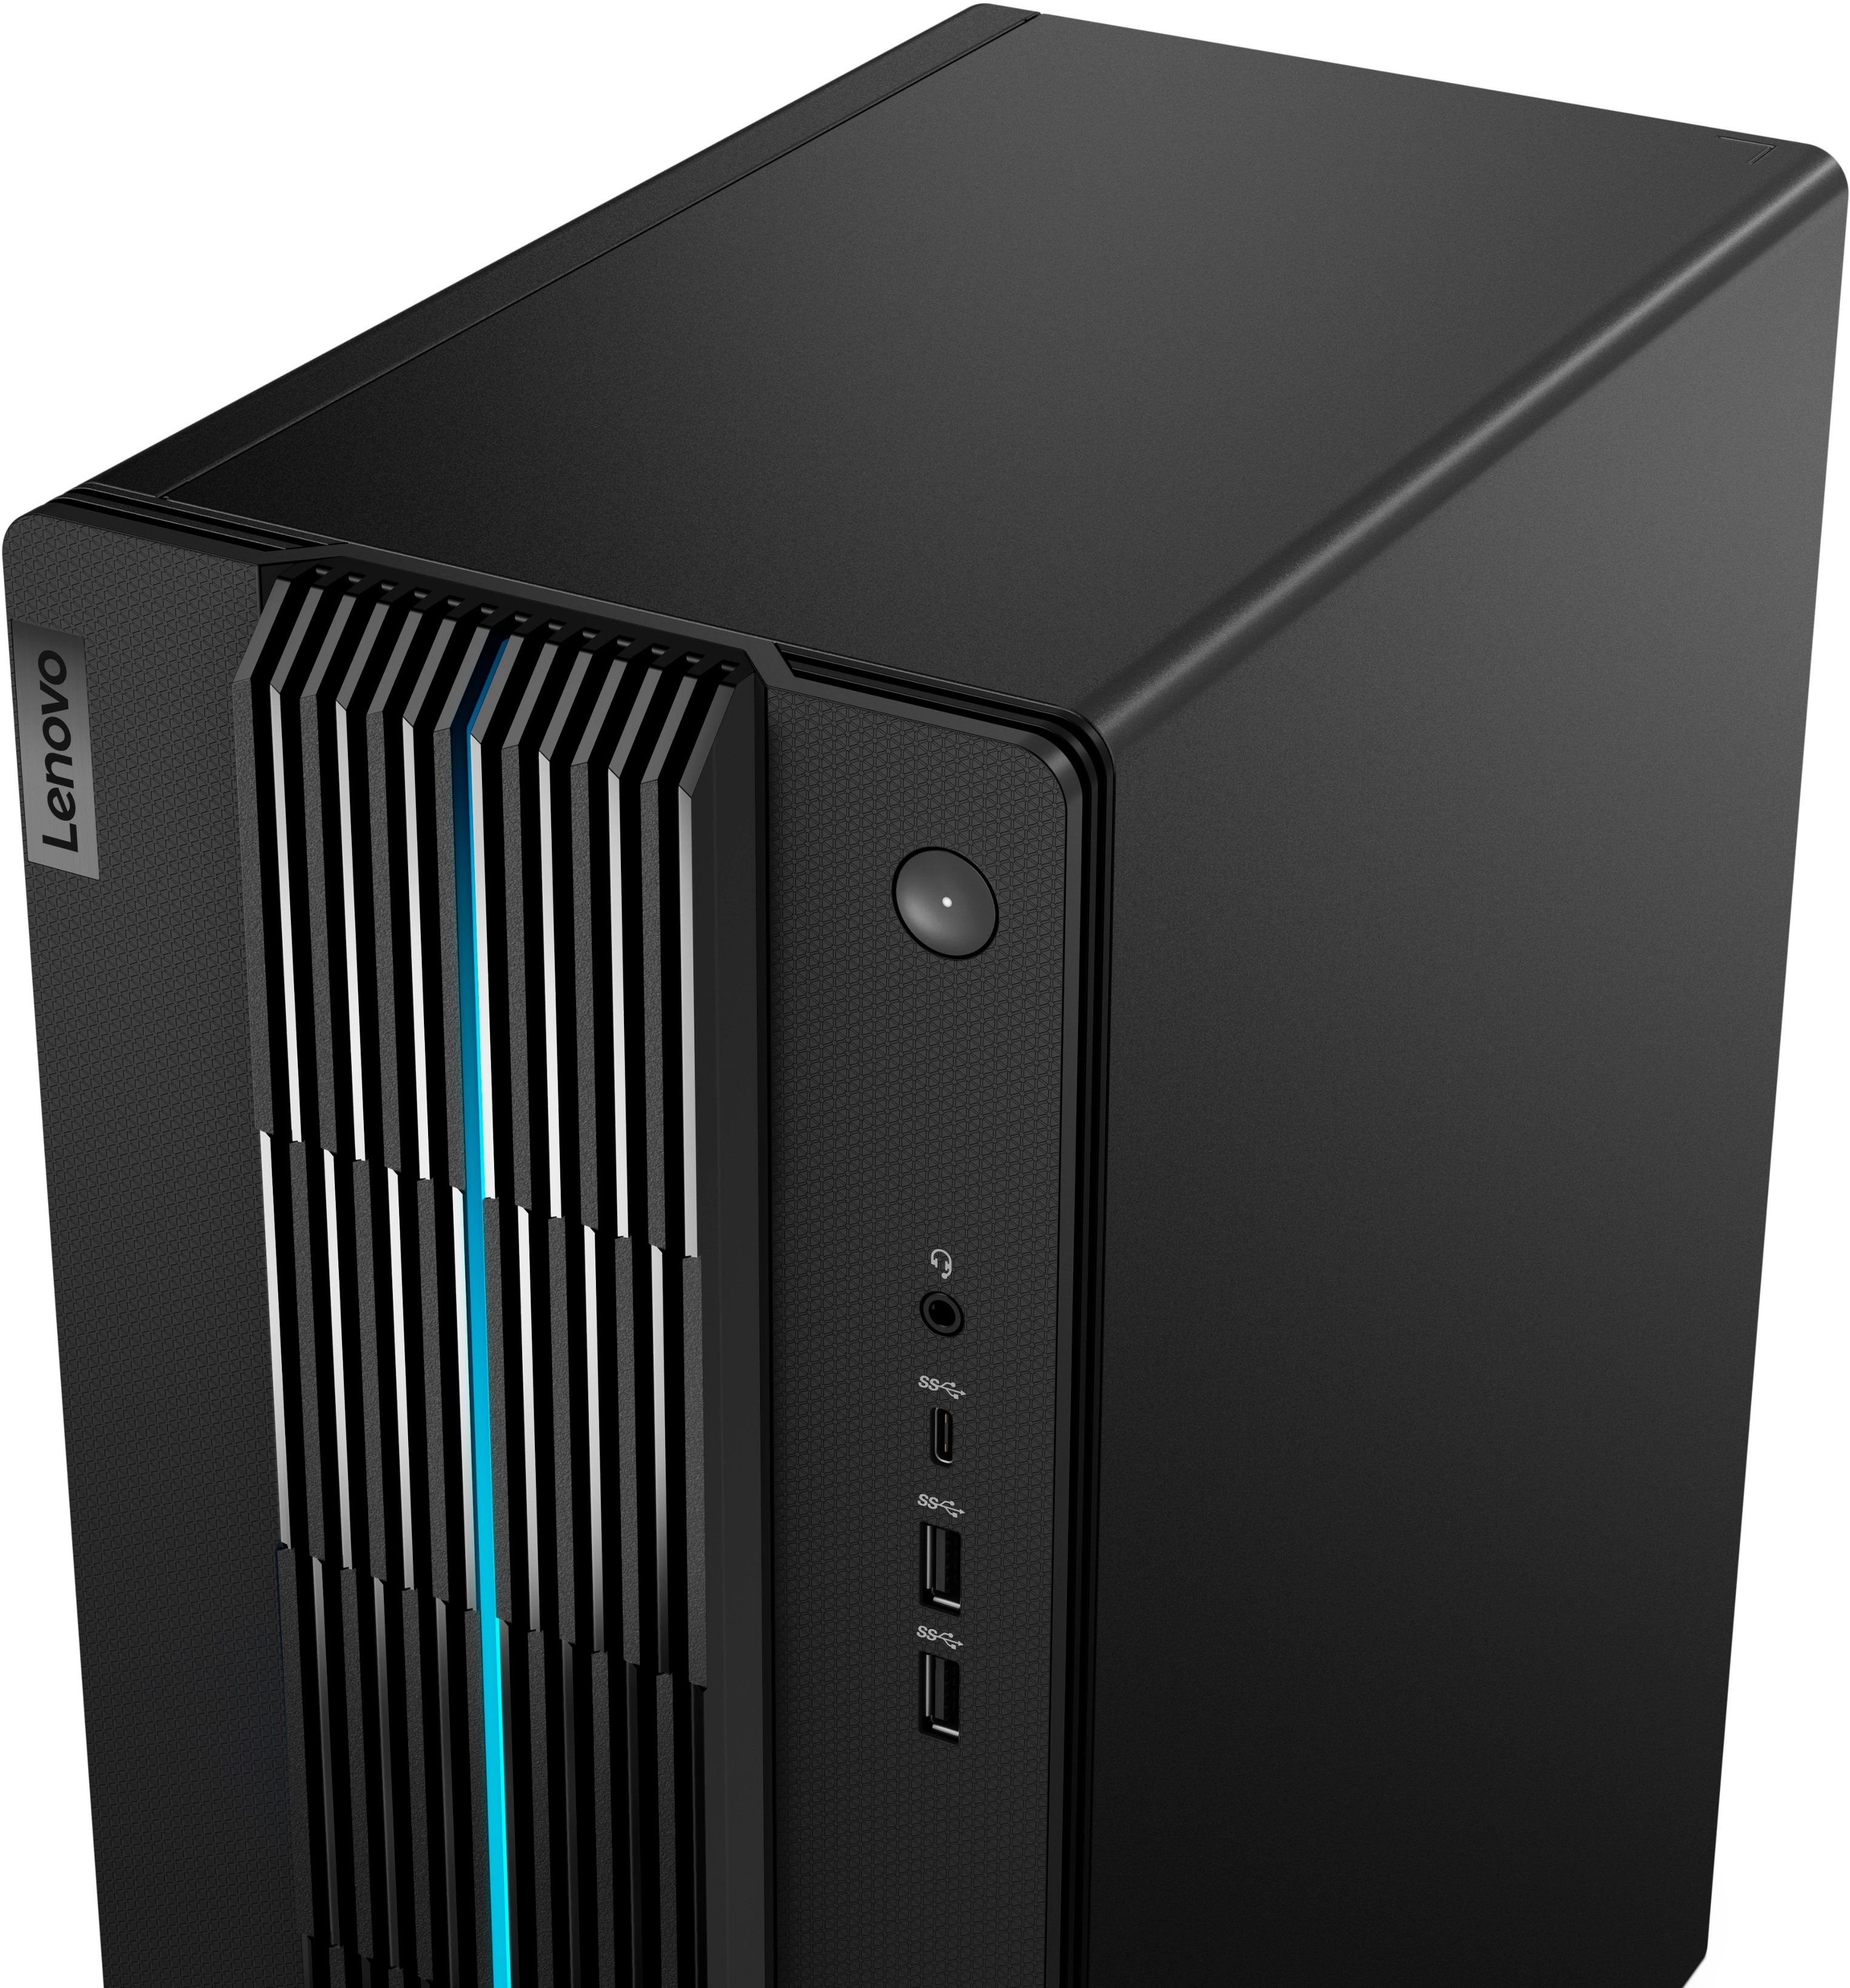 Review: The Lenovo LOQ Tower is a great, compact 1080p gaming desktop